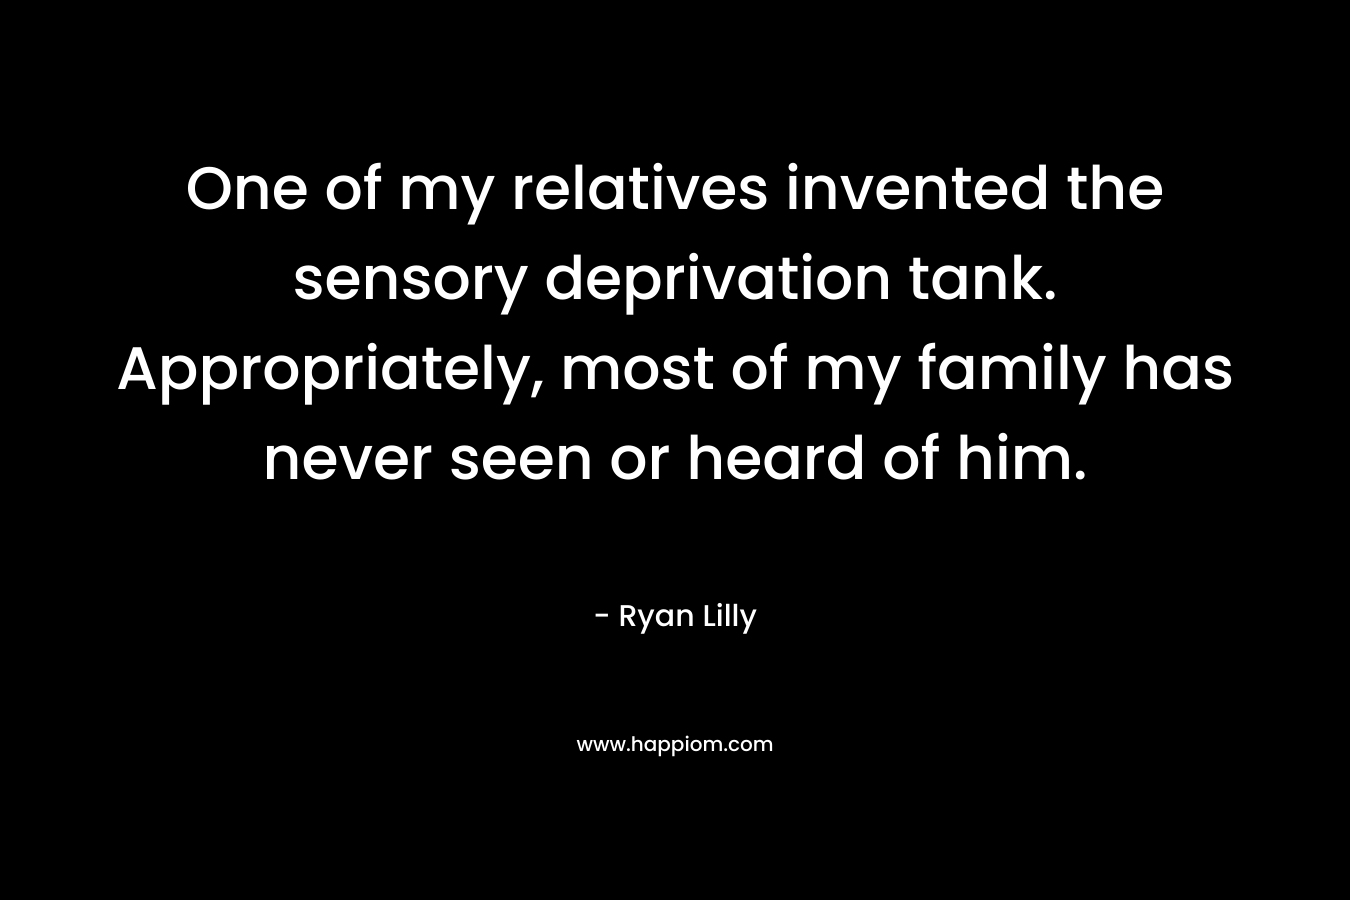 One of my relatives invented the sensory deprivation tank. Appropriately, most of my family has never seen or heard of him. – Ryan Lilly